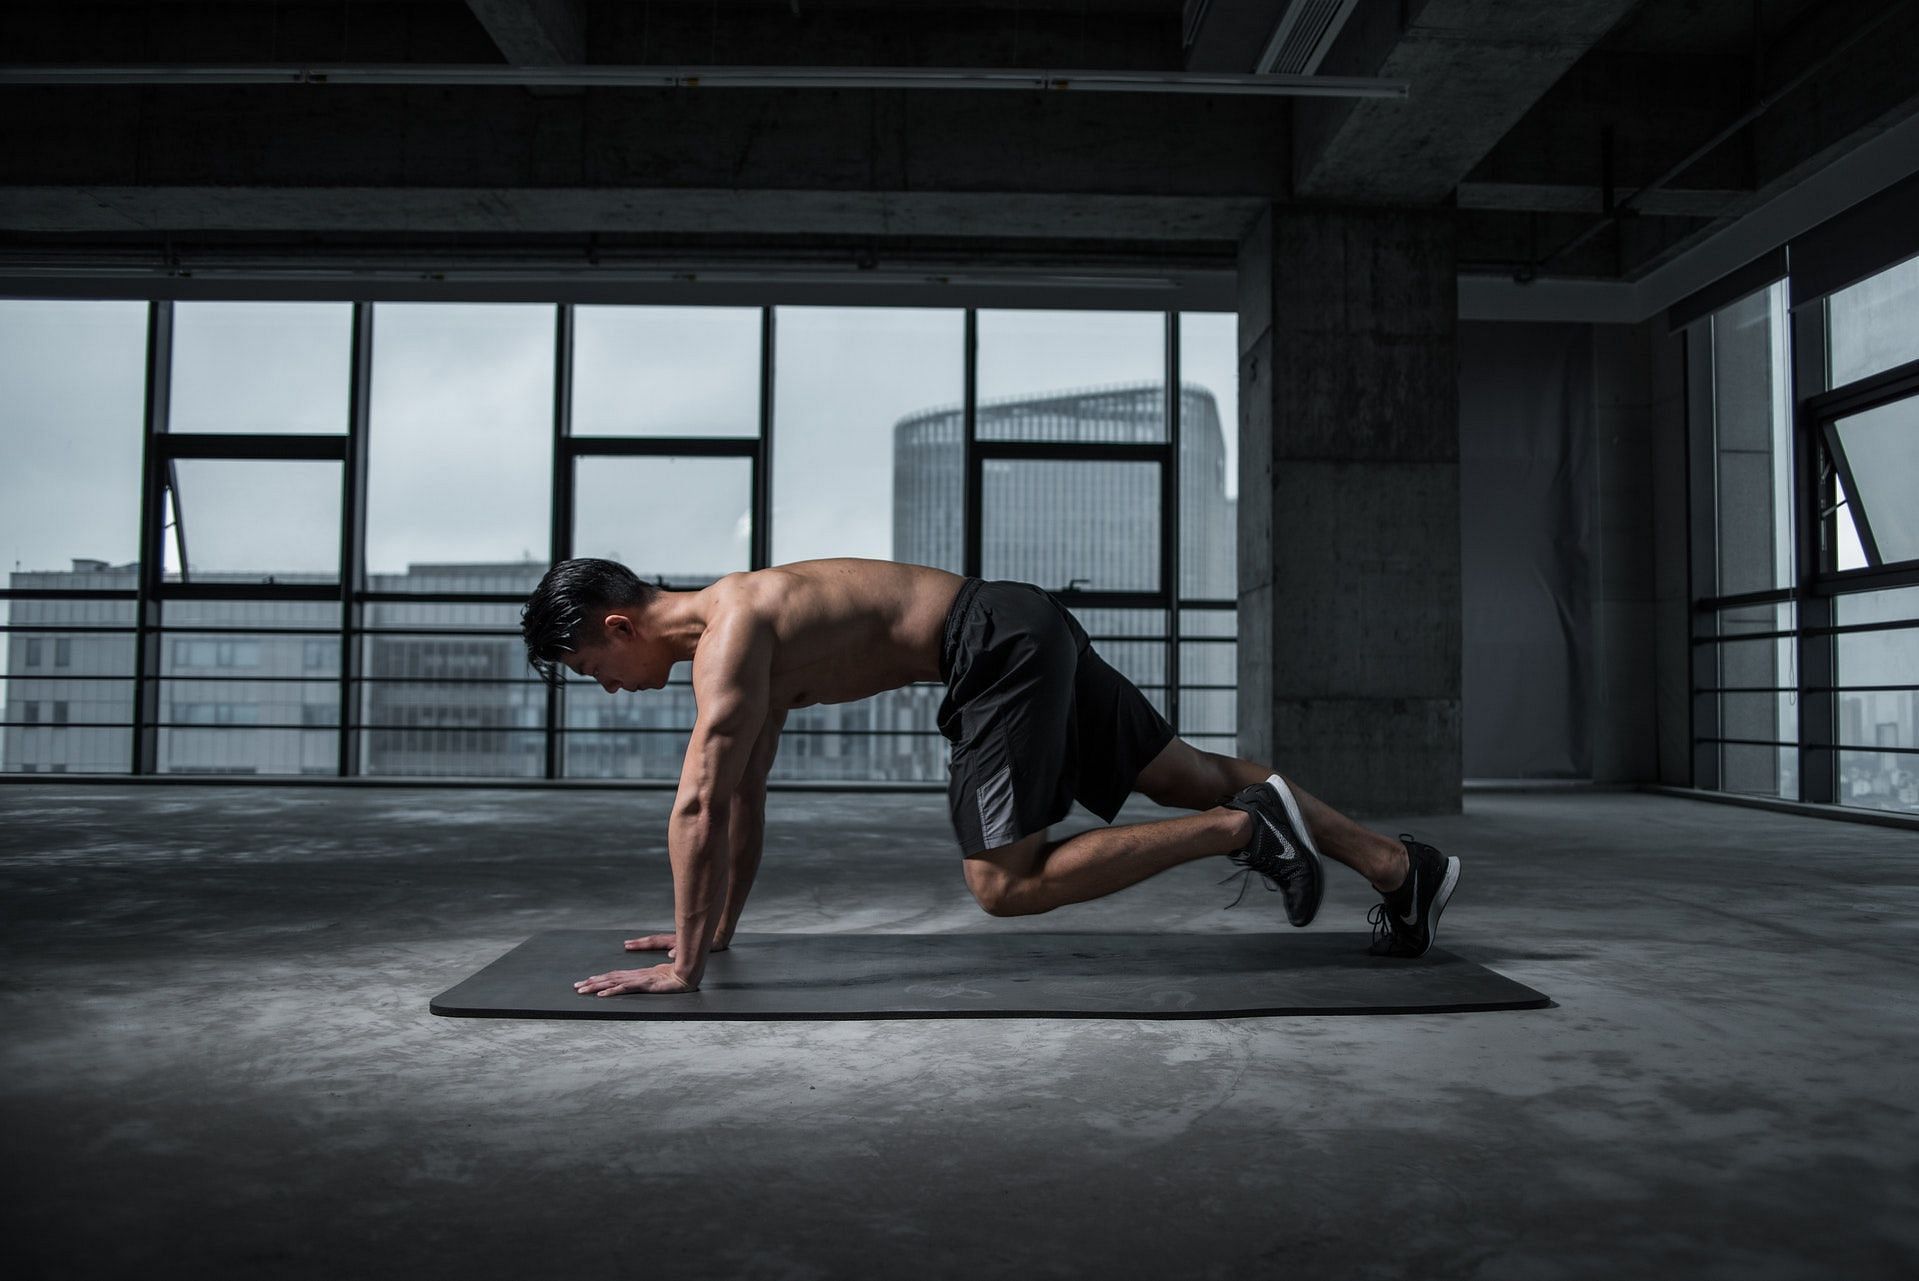 Core exercises to improve strength and flexibility. (Image via Pexels/Photo by Li Sun)